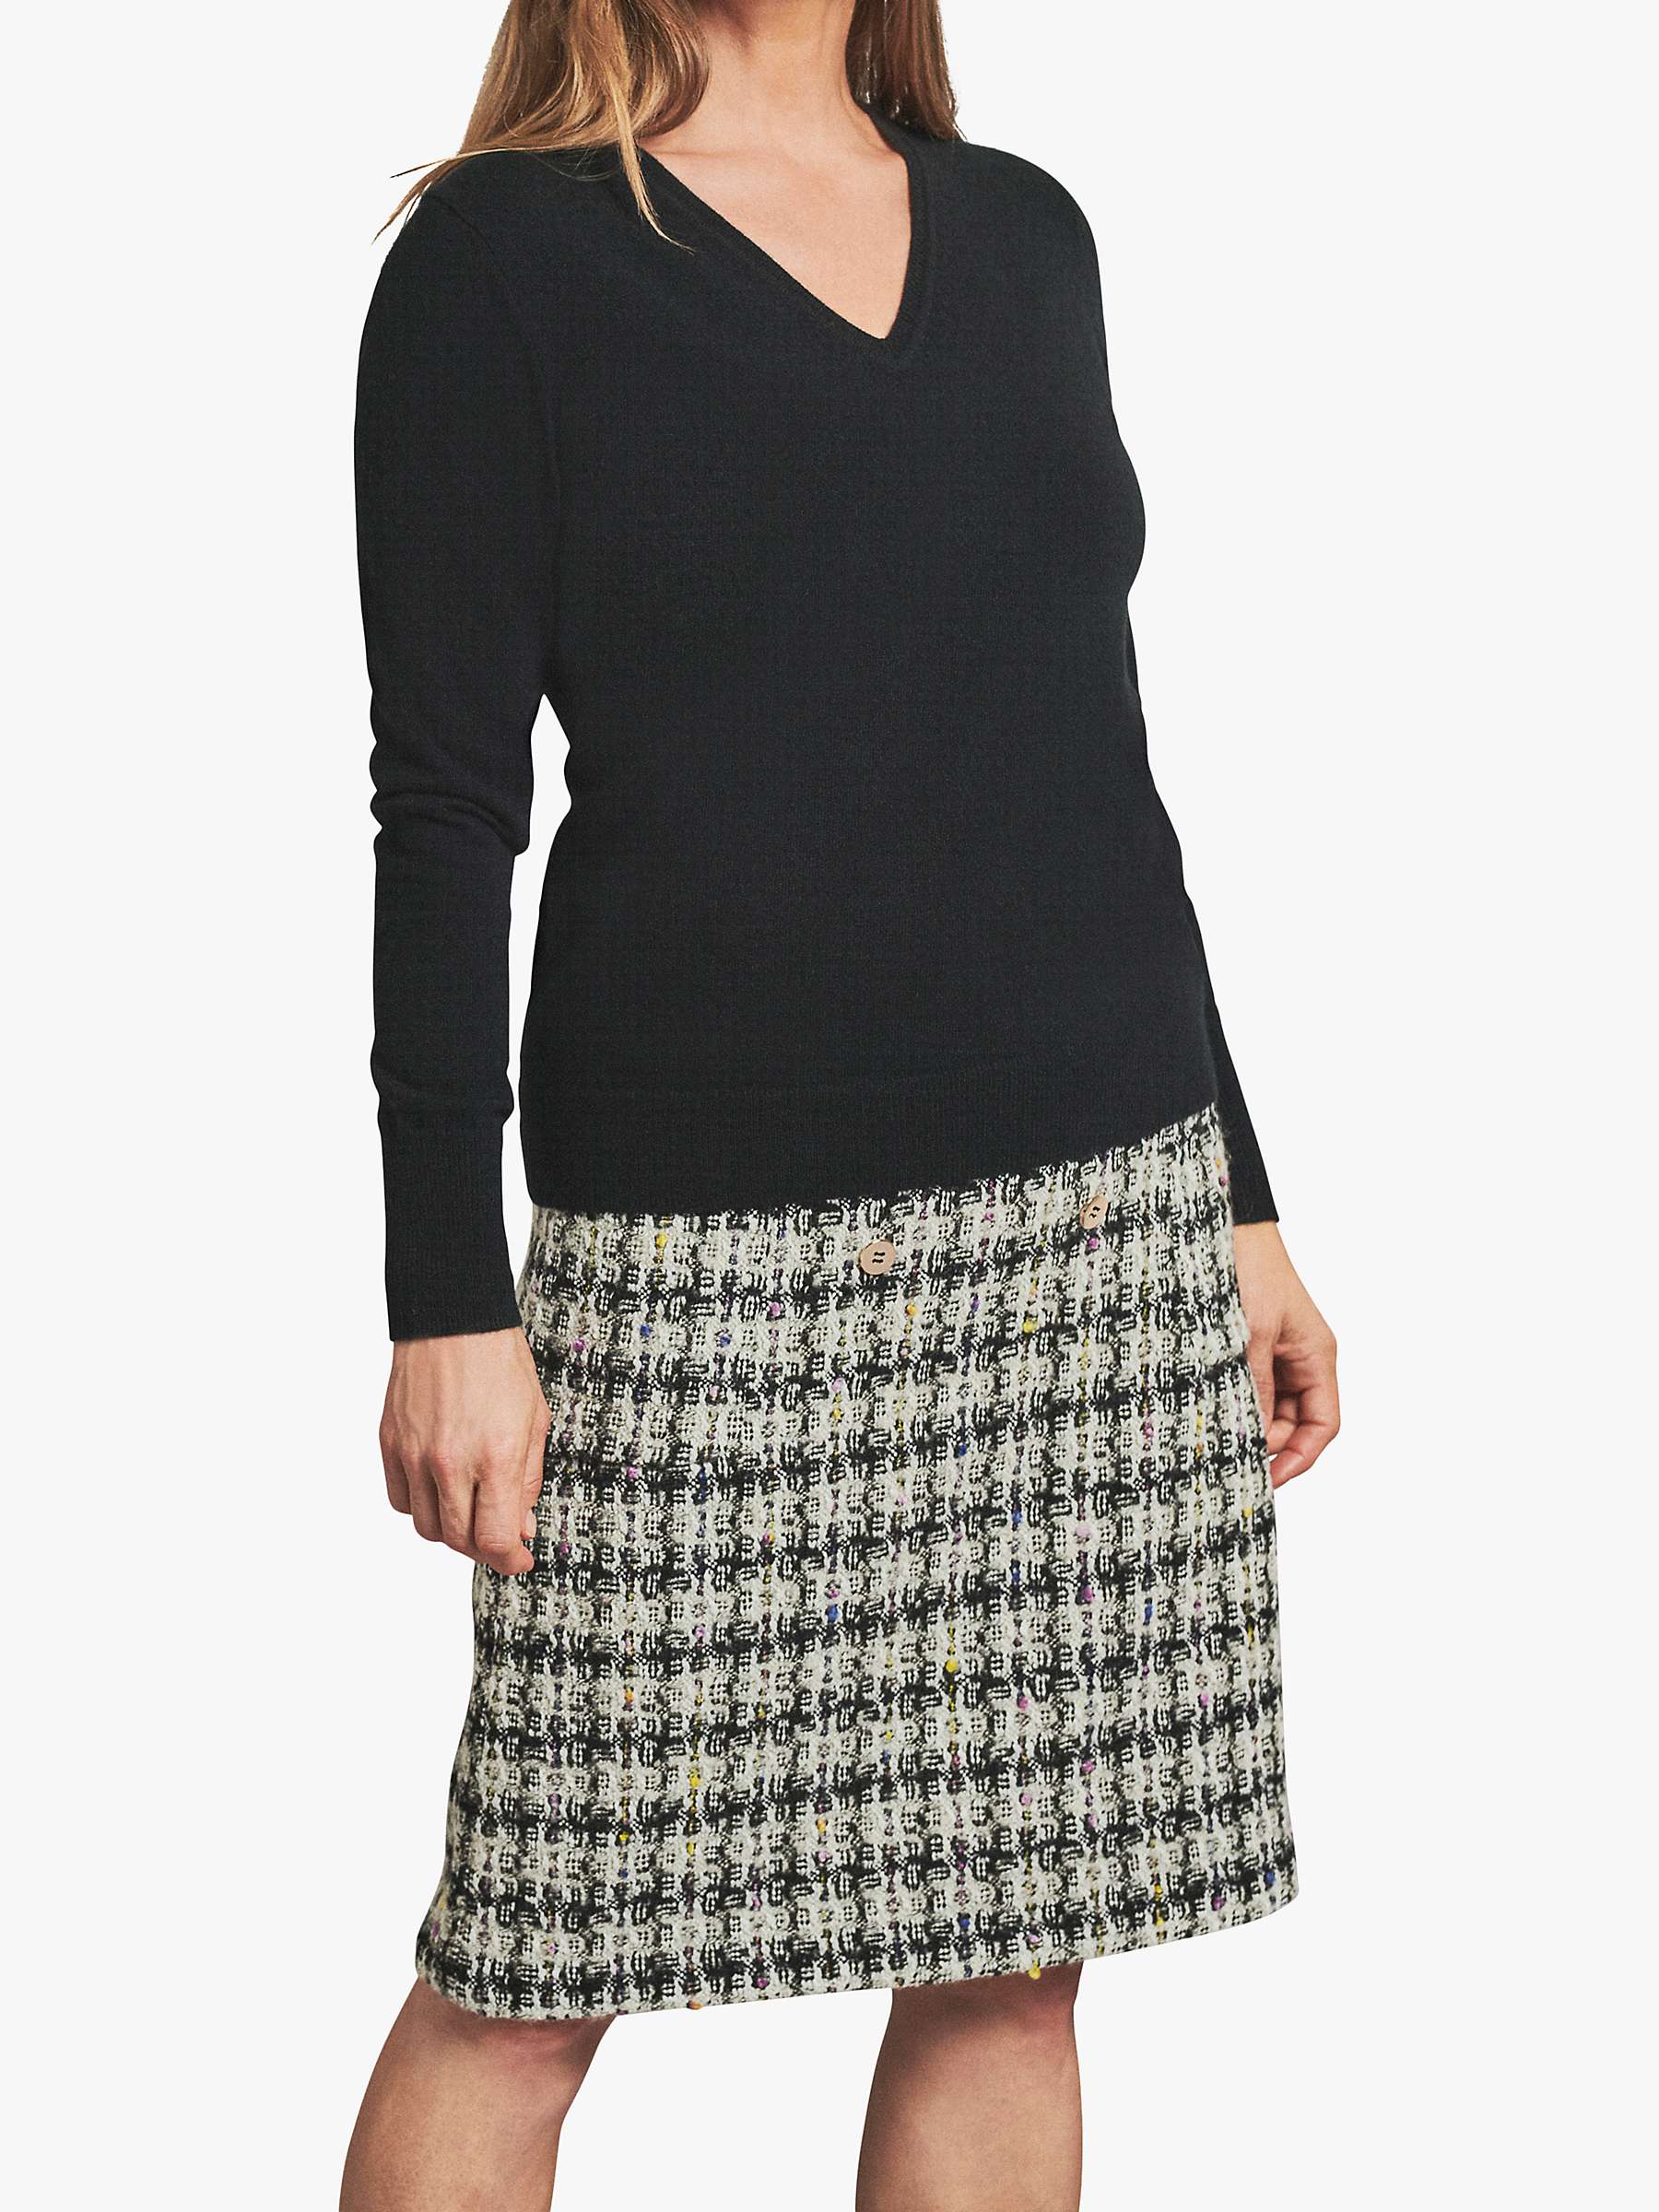 Buy Pure Collection Cashmere V-Neck Sweater, Black Online at johnlewis.com